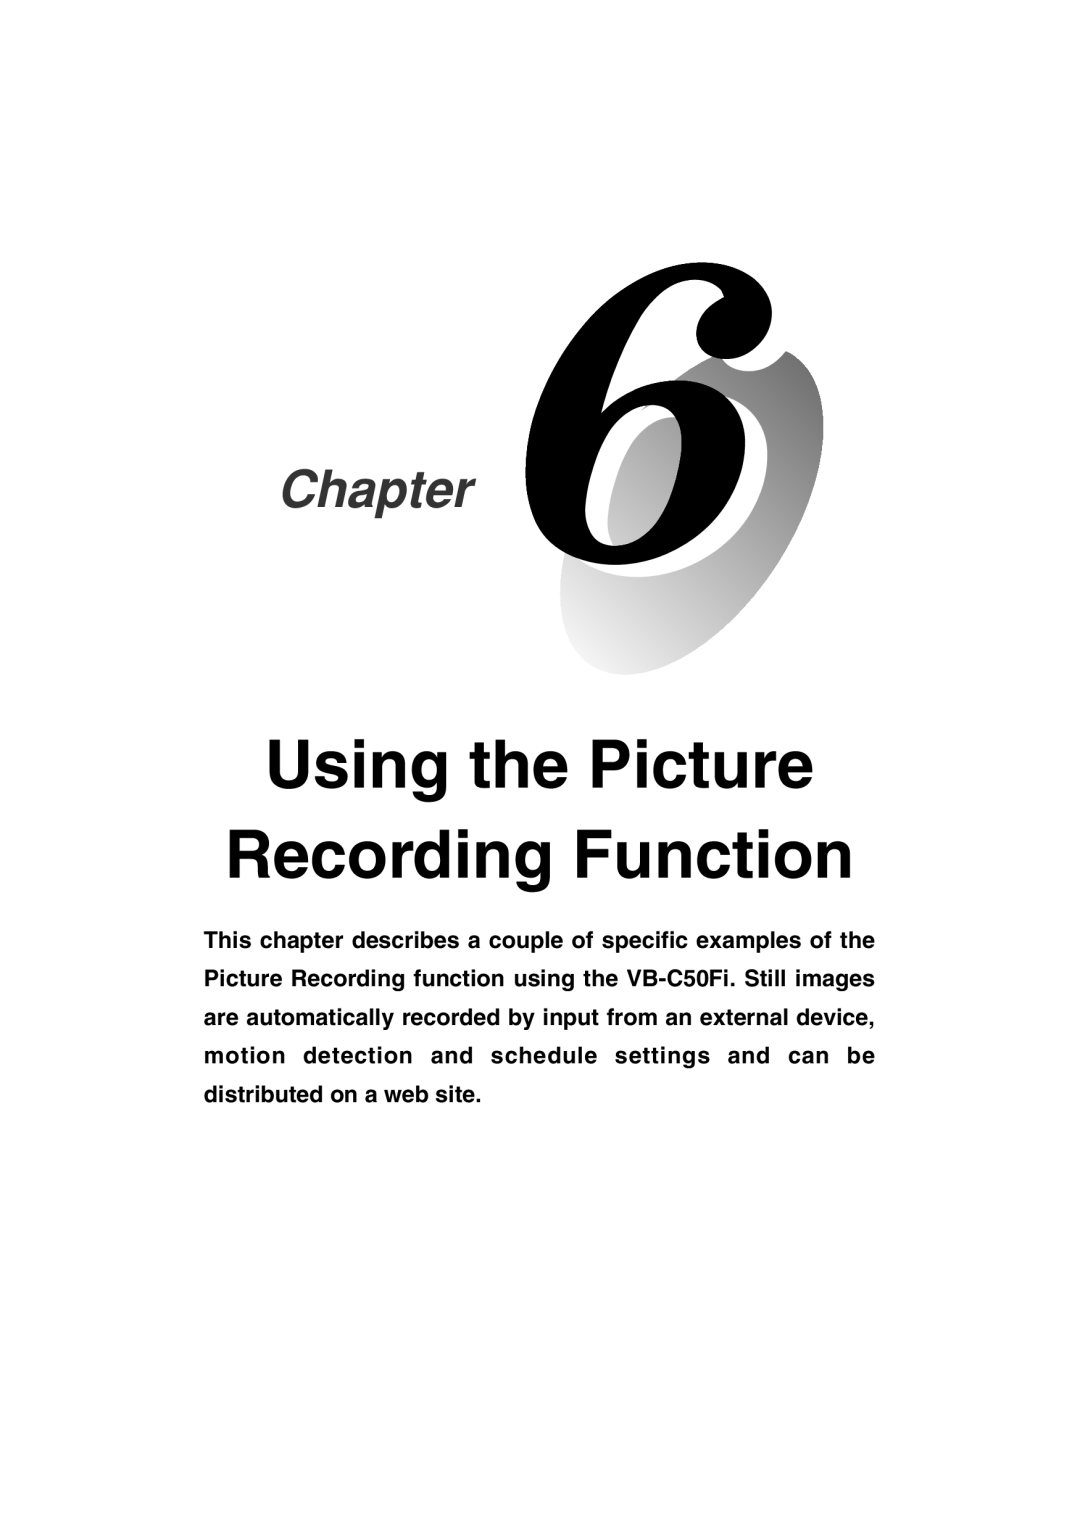 Canon Vb-C50fi user manual Using the Picture Recording Function, Chapter 